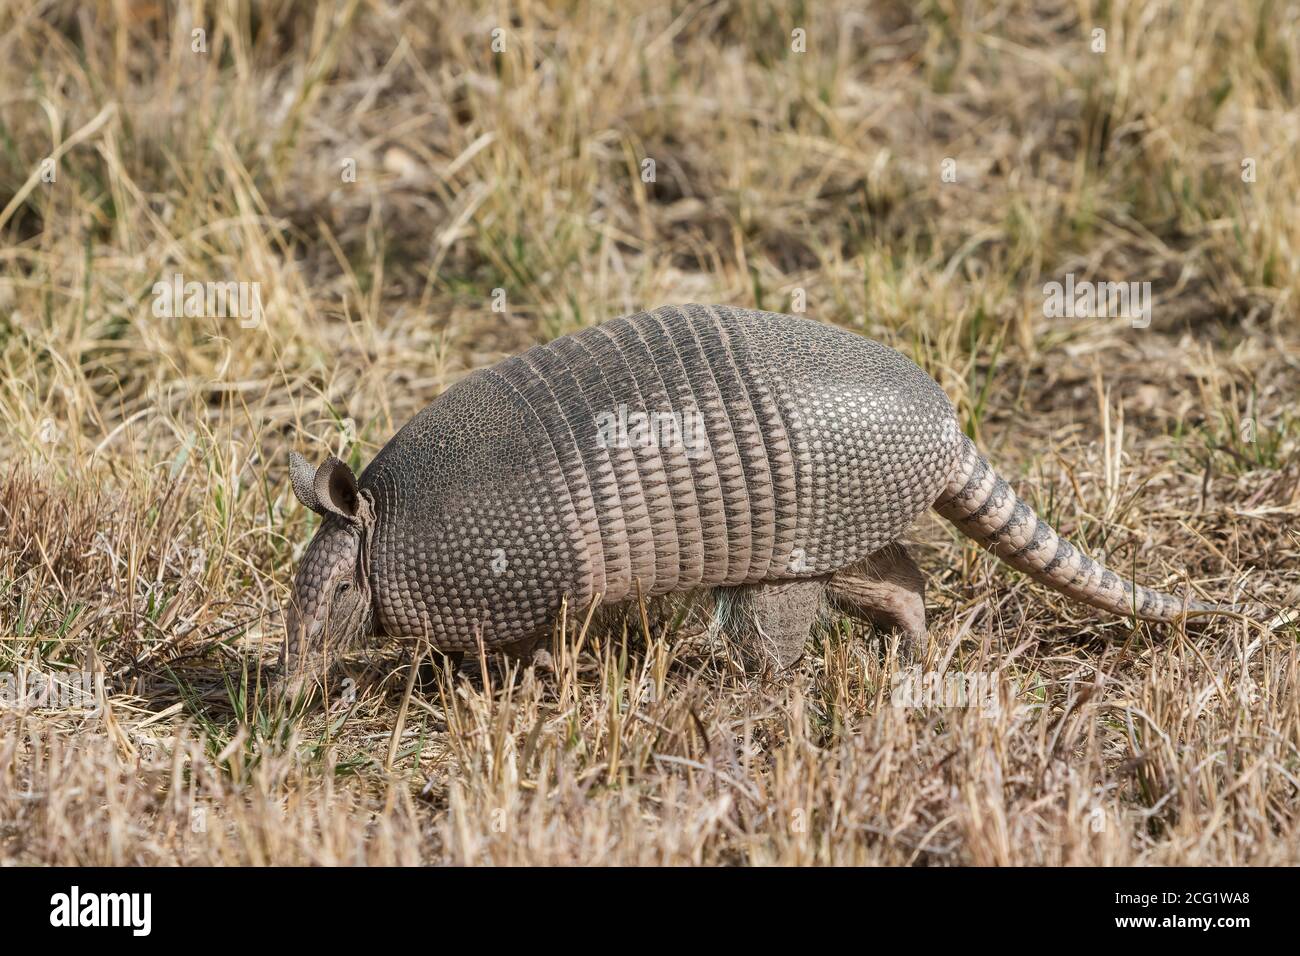 The Nine-banded Armadillo or Long-nosed Armadillo, Dasypus novemcinctus, is widespread throughout the southeastern U.S.  southward through South Ameri Stock Photo